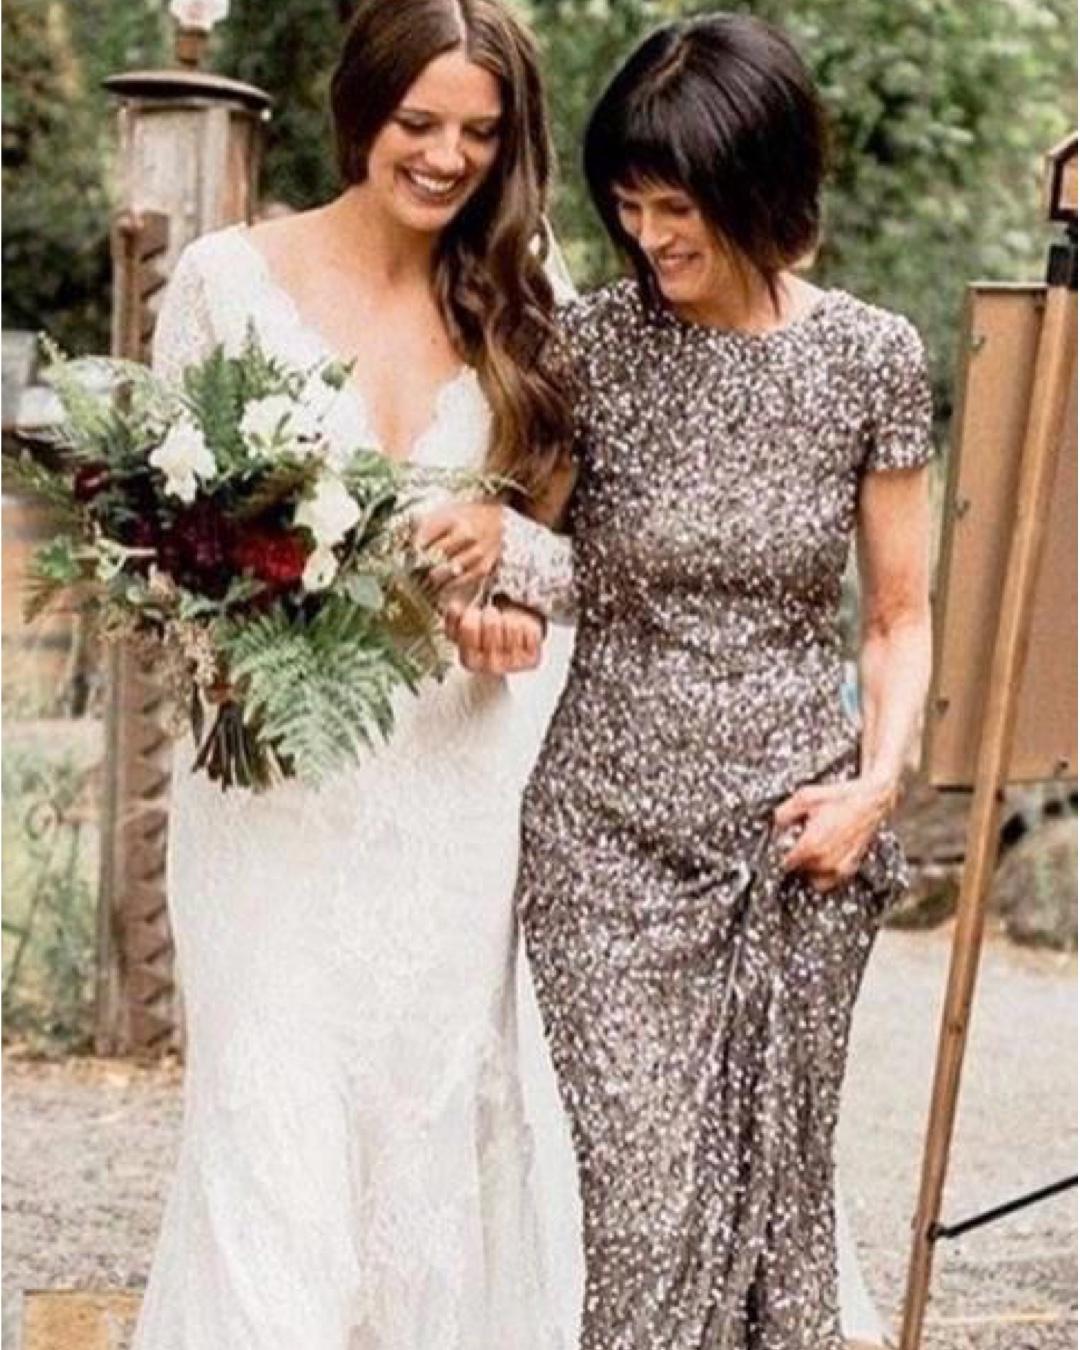 How to Choose Mother of the Bride Dress